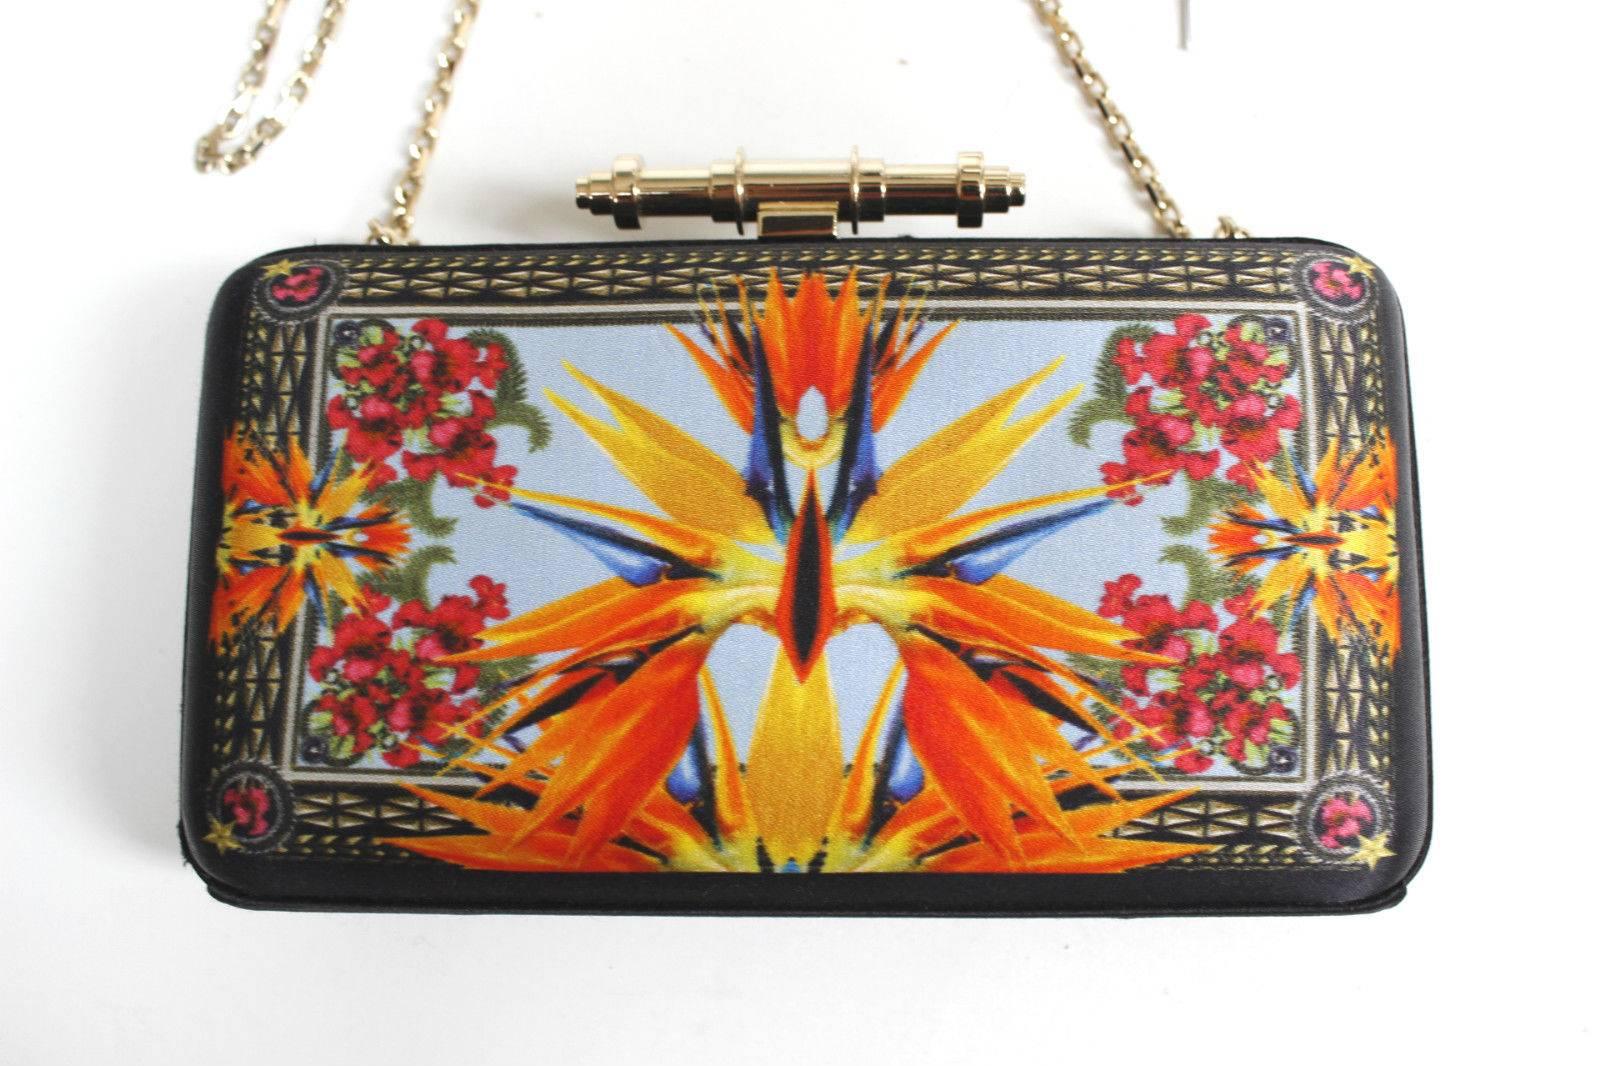 Black and orange satin Givenchy Obsedia minaudiere with bird of paradise motif, gold tone hardware, 
Detachable gold chain strap and flip-lock closure at top
Excellent condition